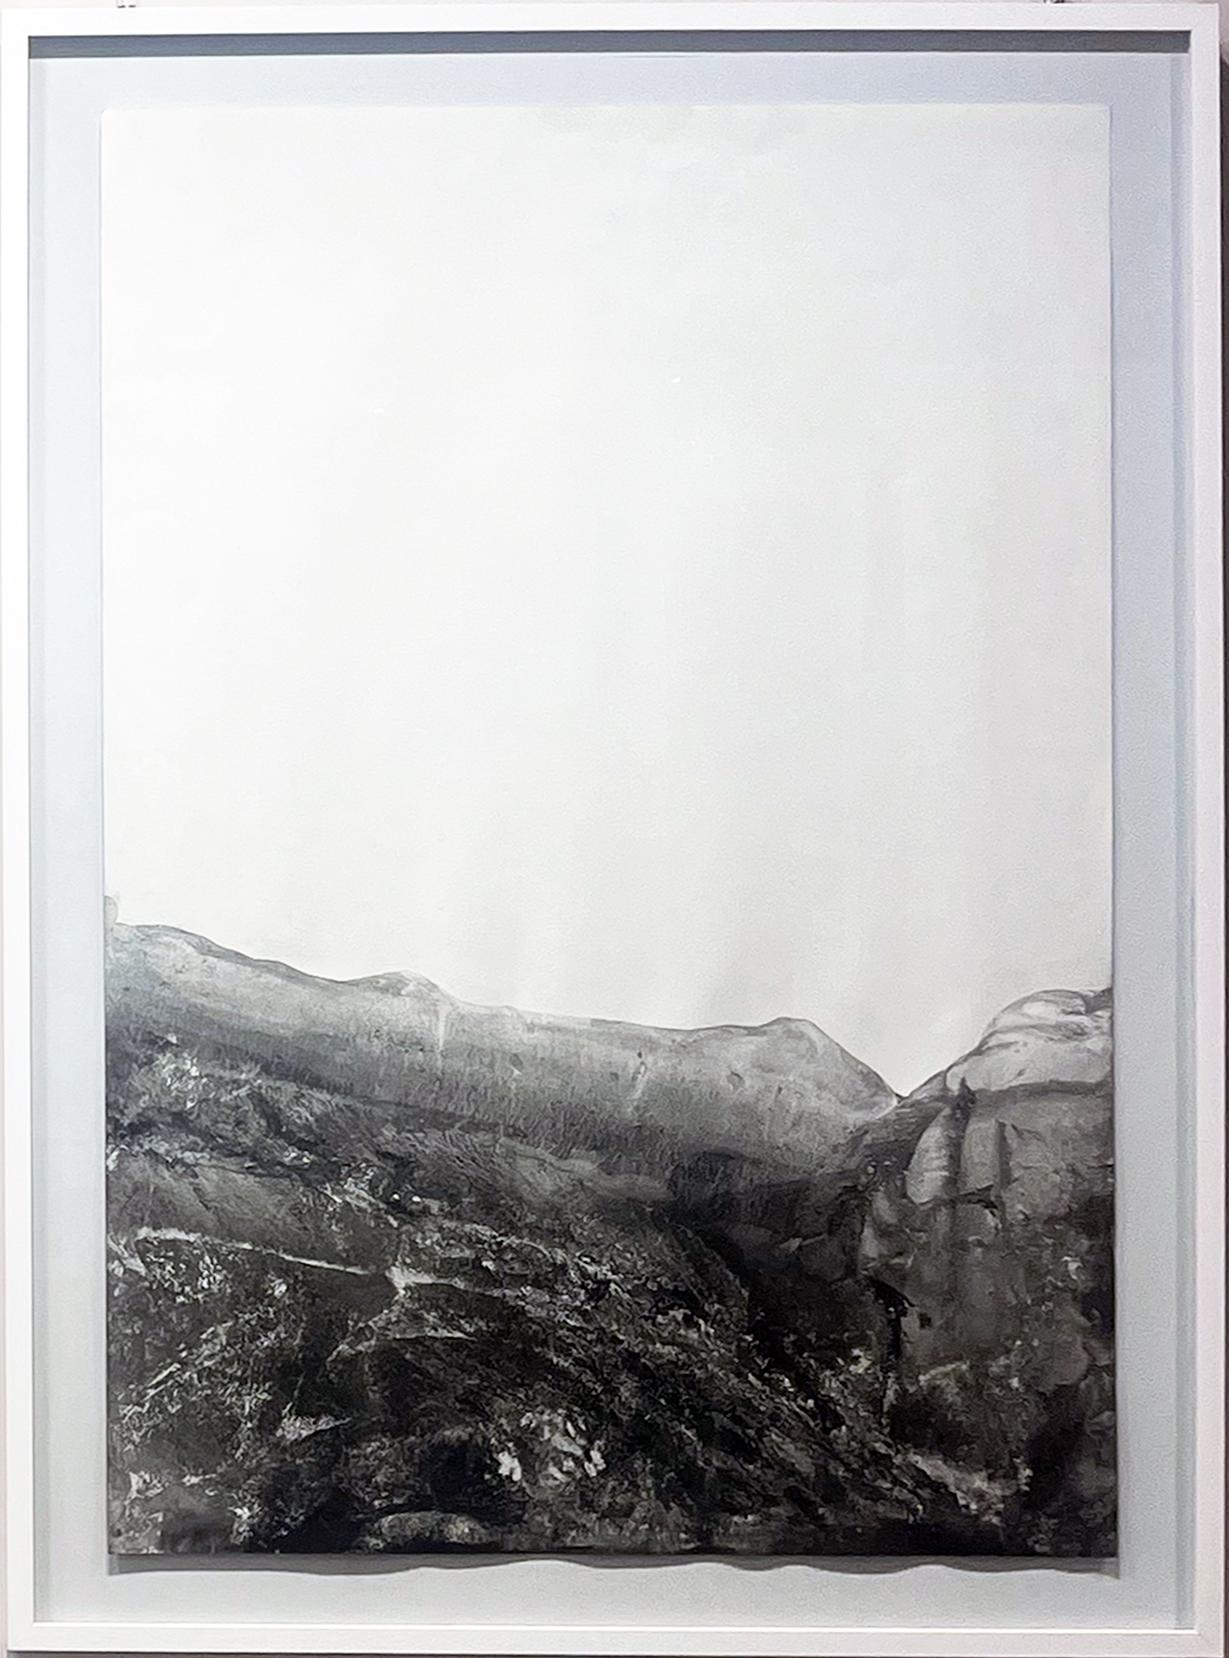  Landscape BW

Mineral Oxide on Canson Paper (300gr)
75x110 cm
framed SIZE
92x122cm

Ready to Hang
the paint have frame
this painting is published in the personal exhibition catalogue
